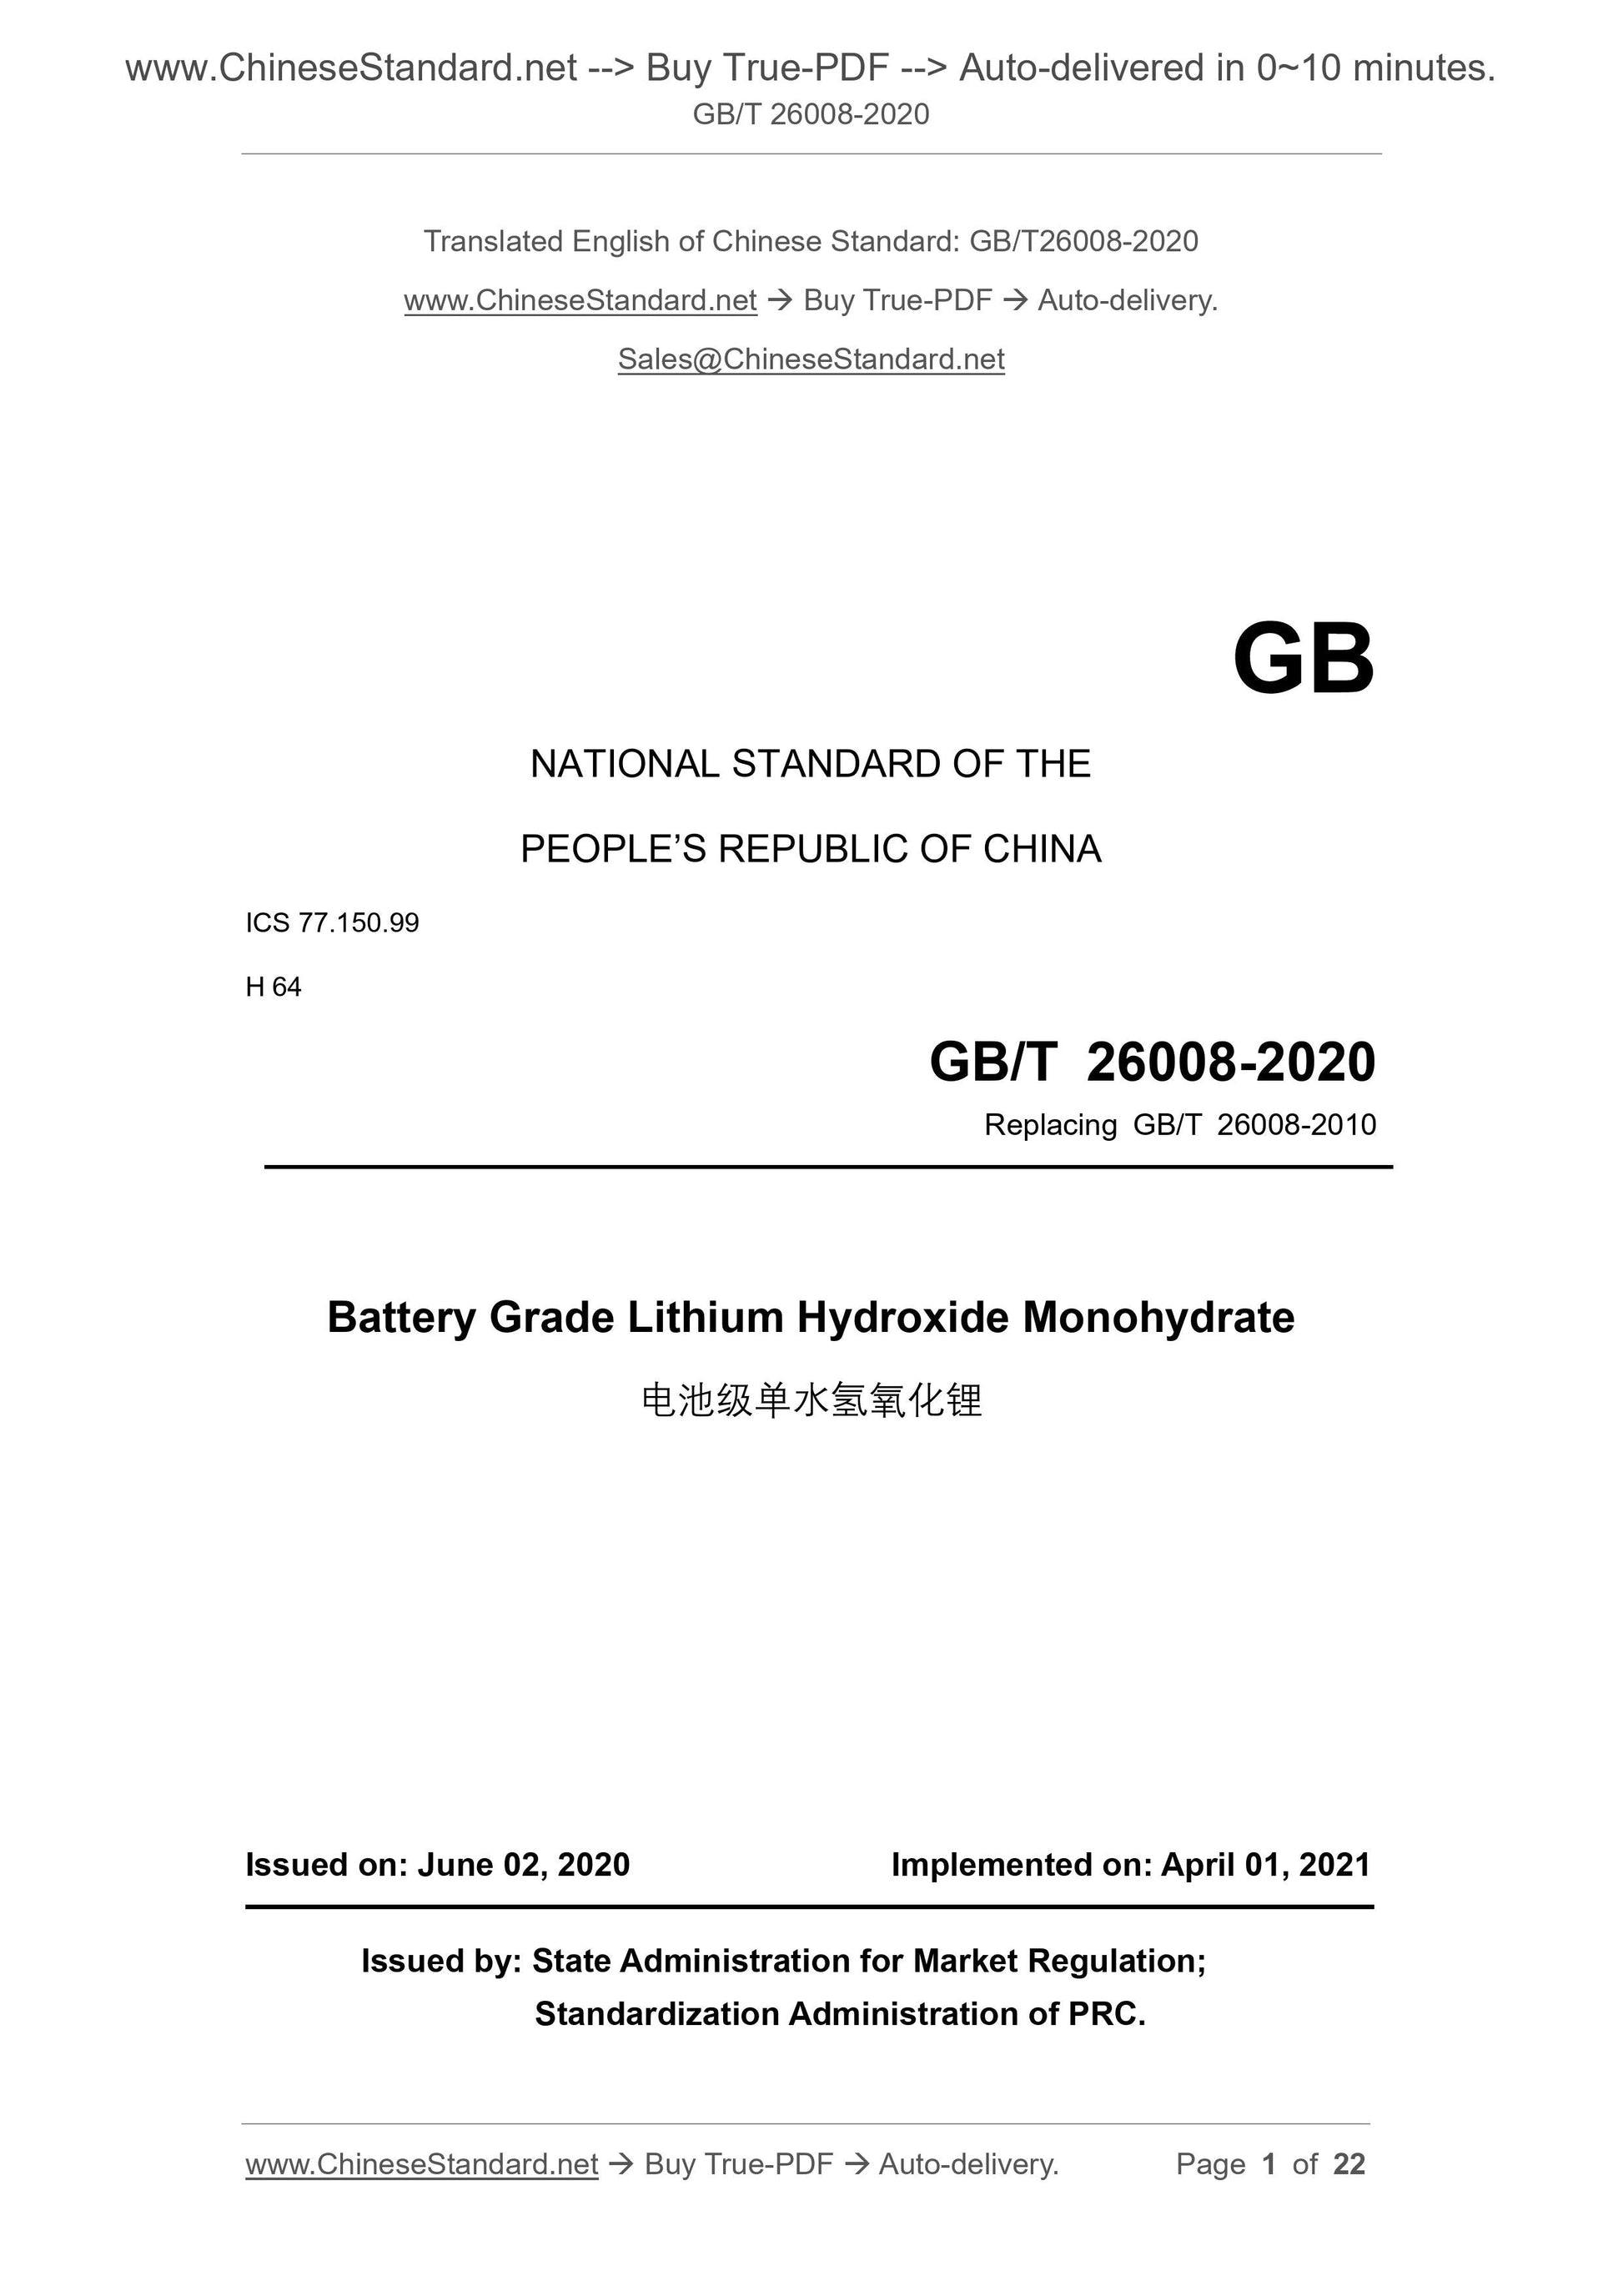 GB/T 26008-2020 Page 1